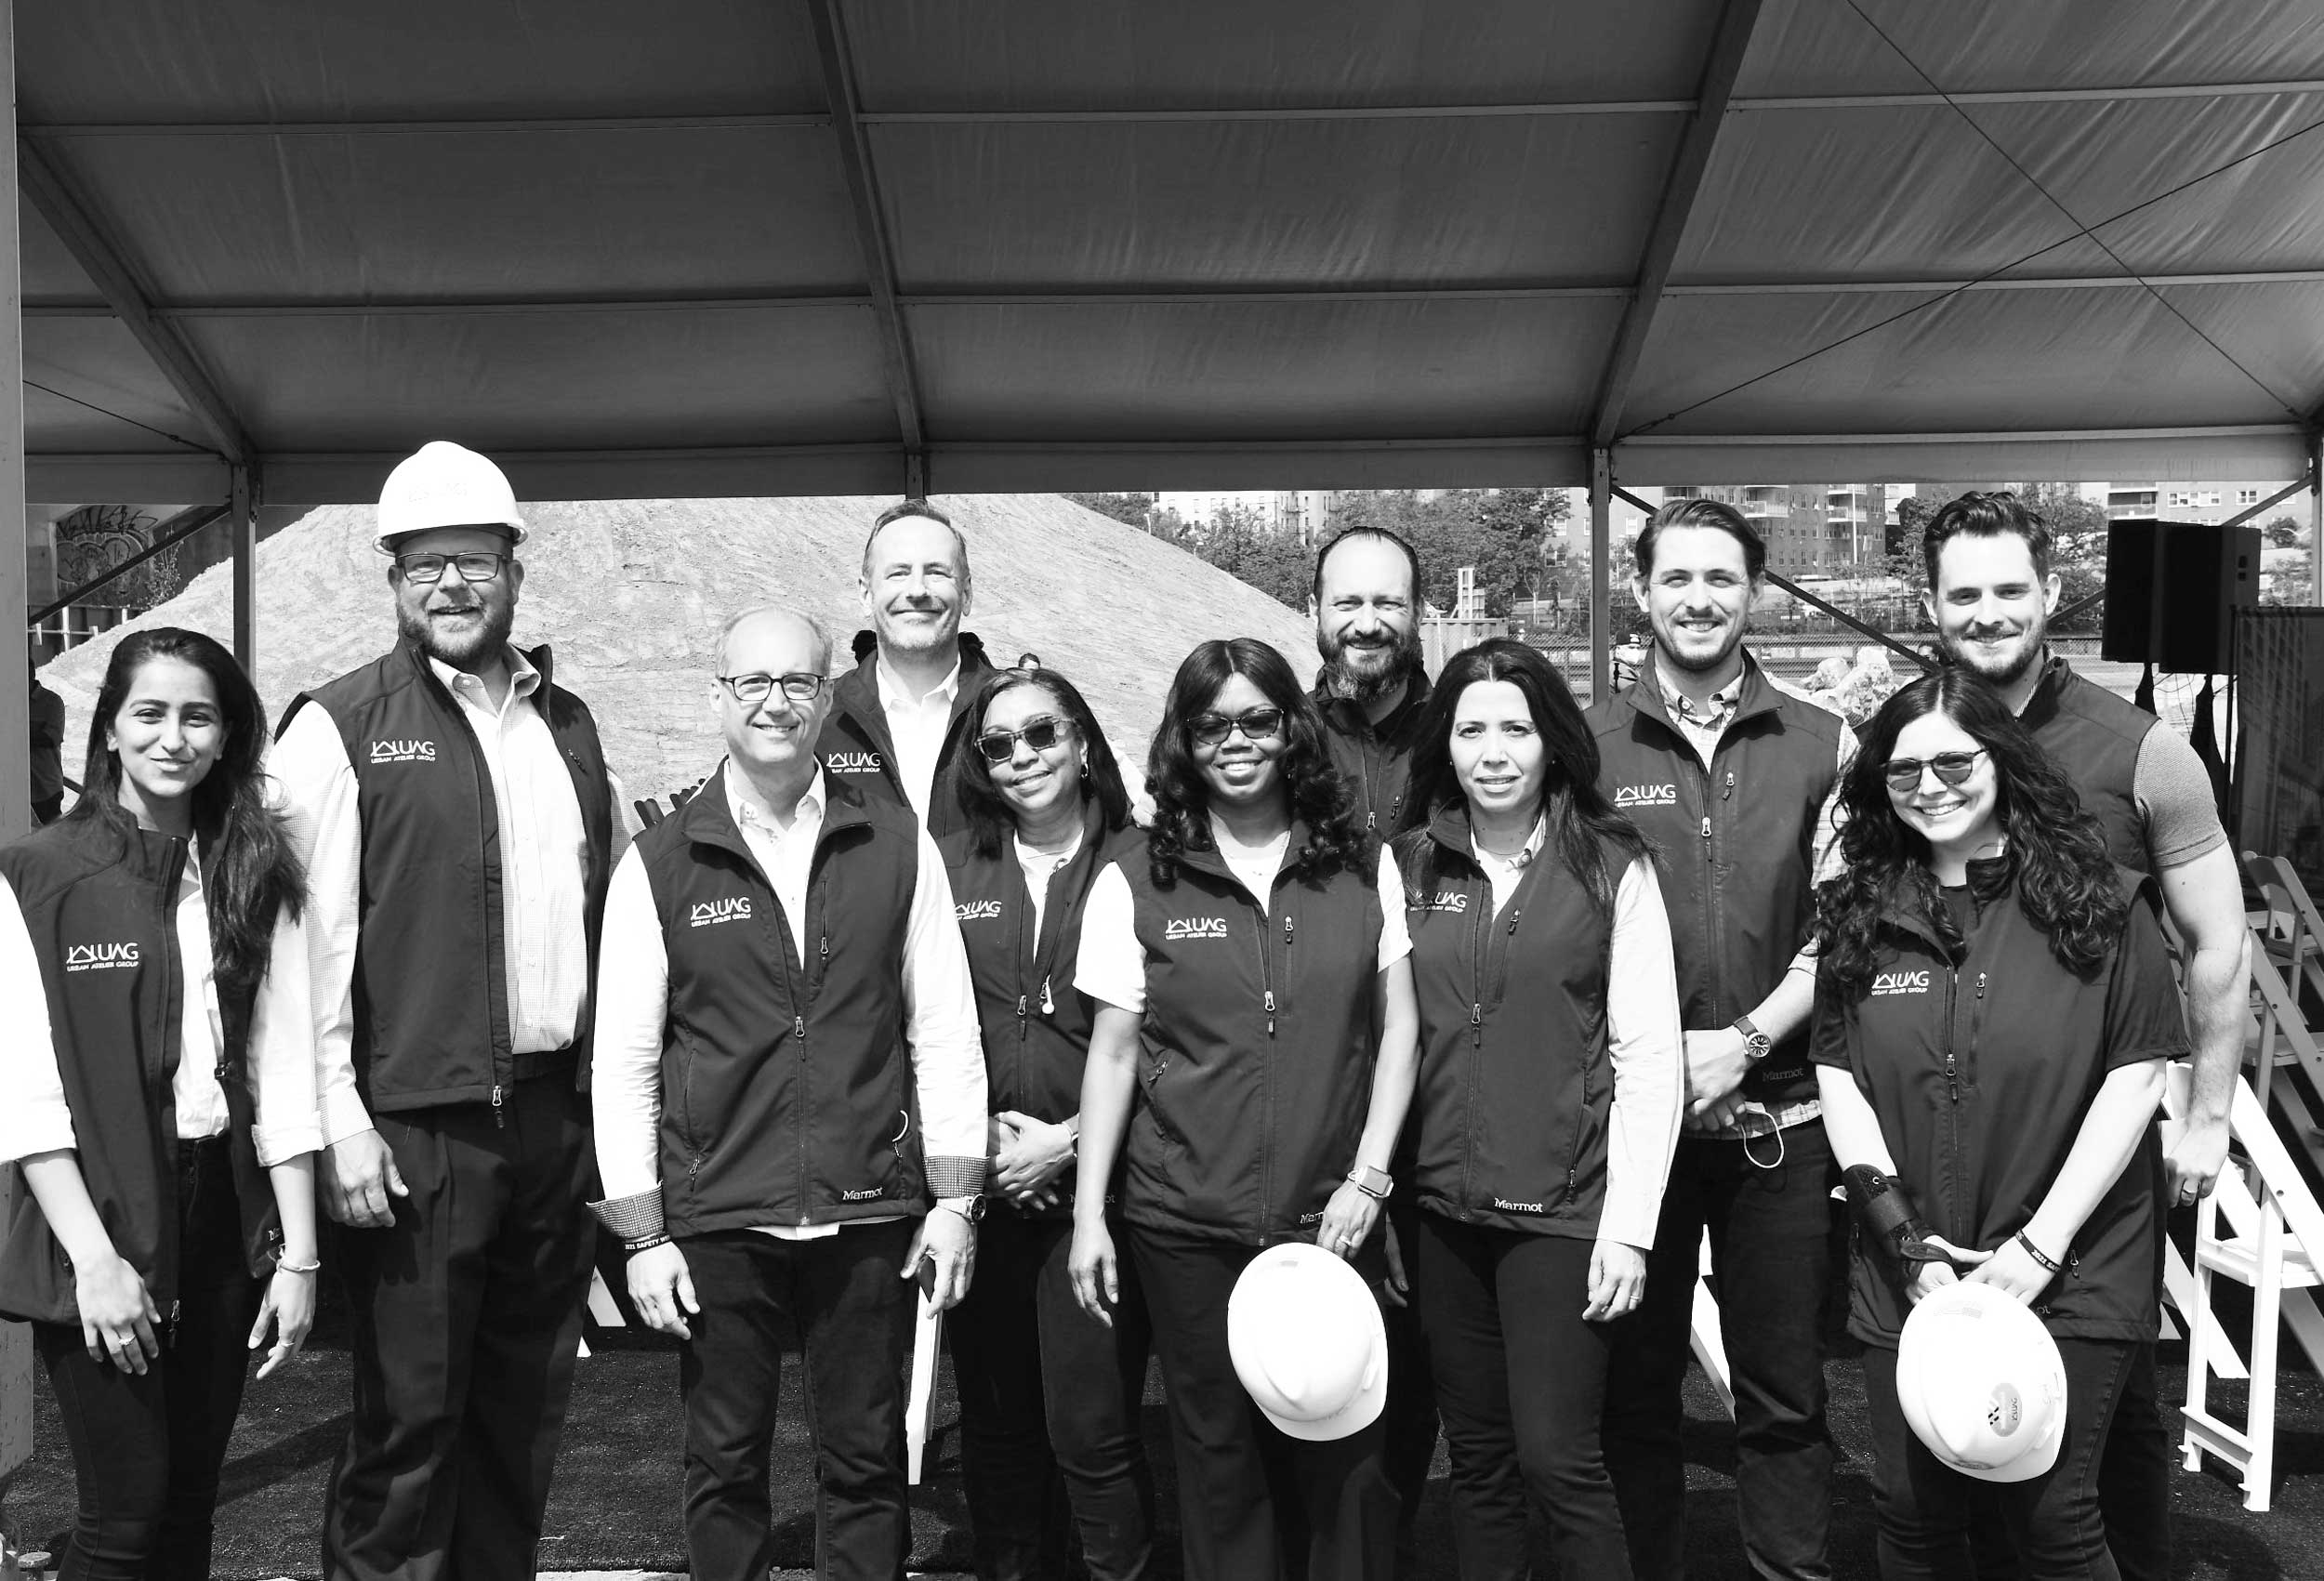 Eleven UAG employees at a construction site.